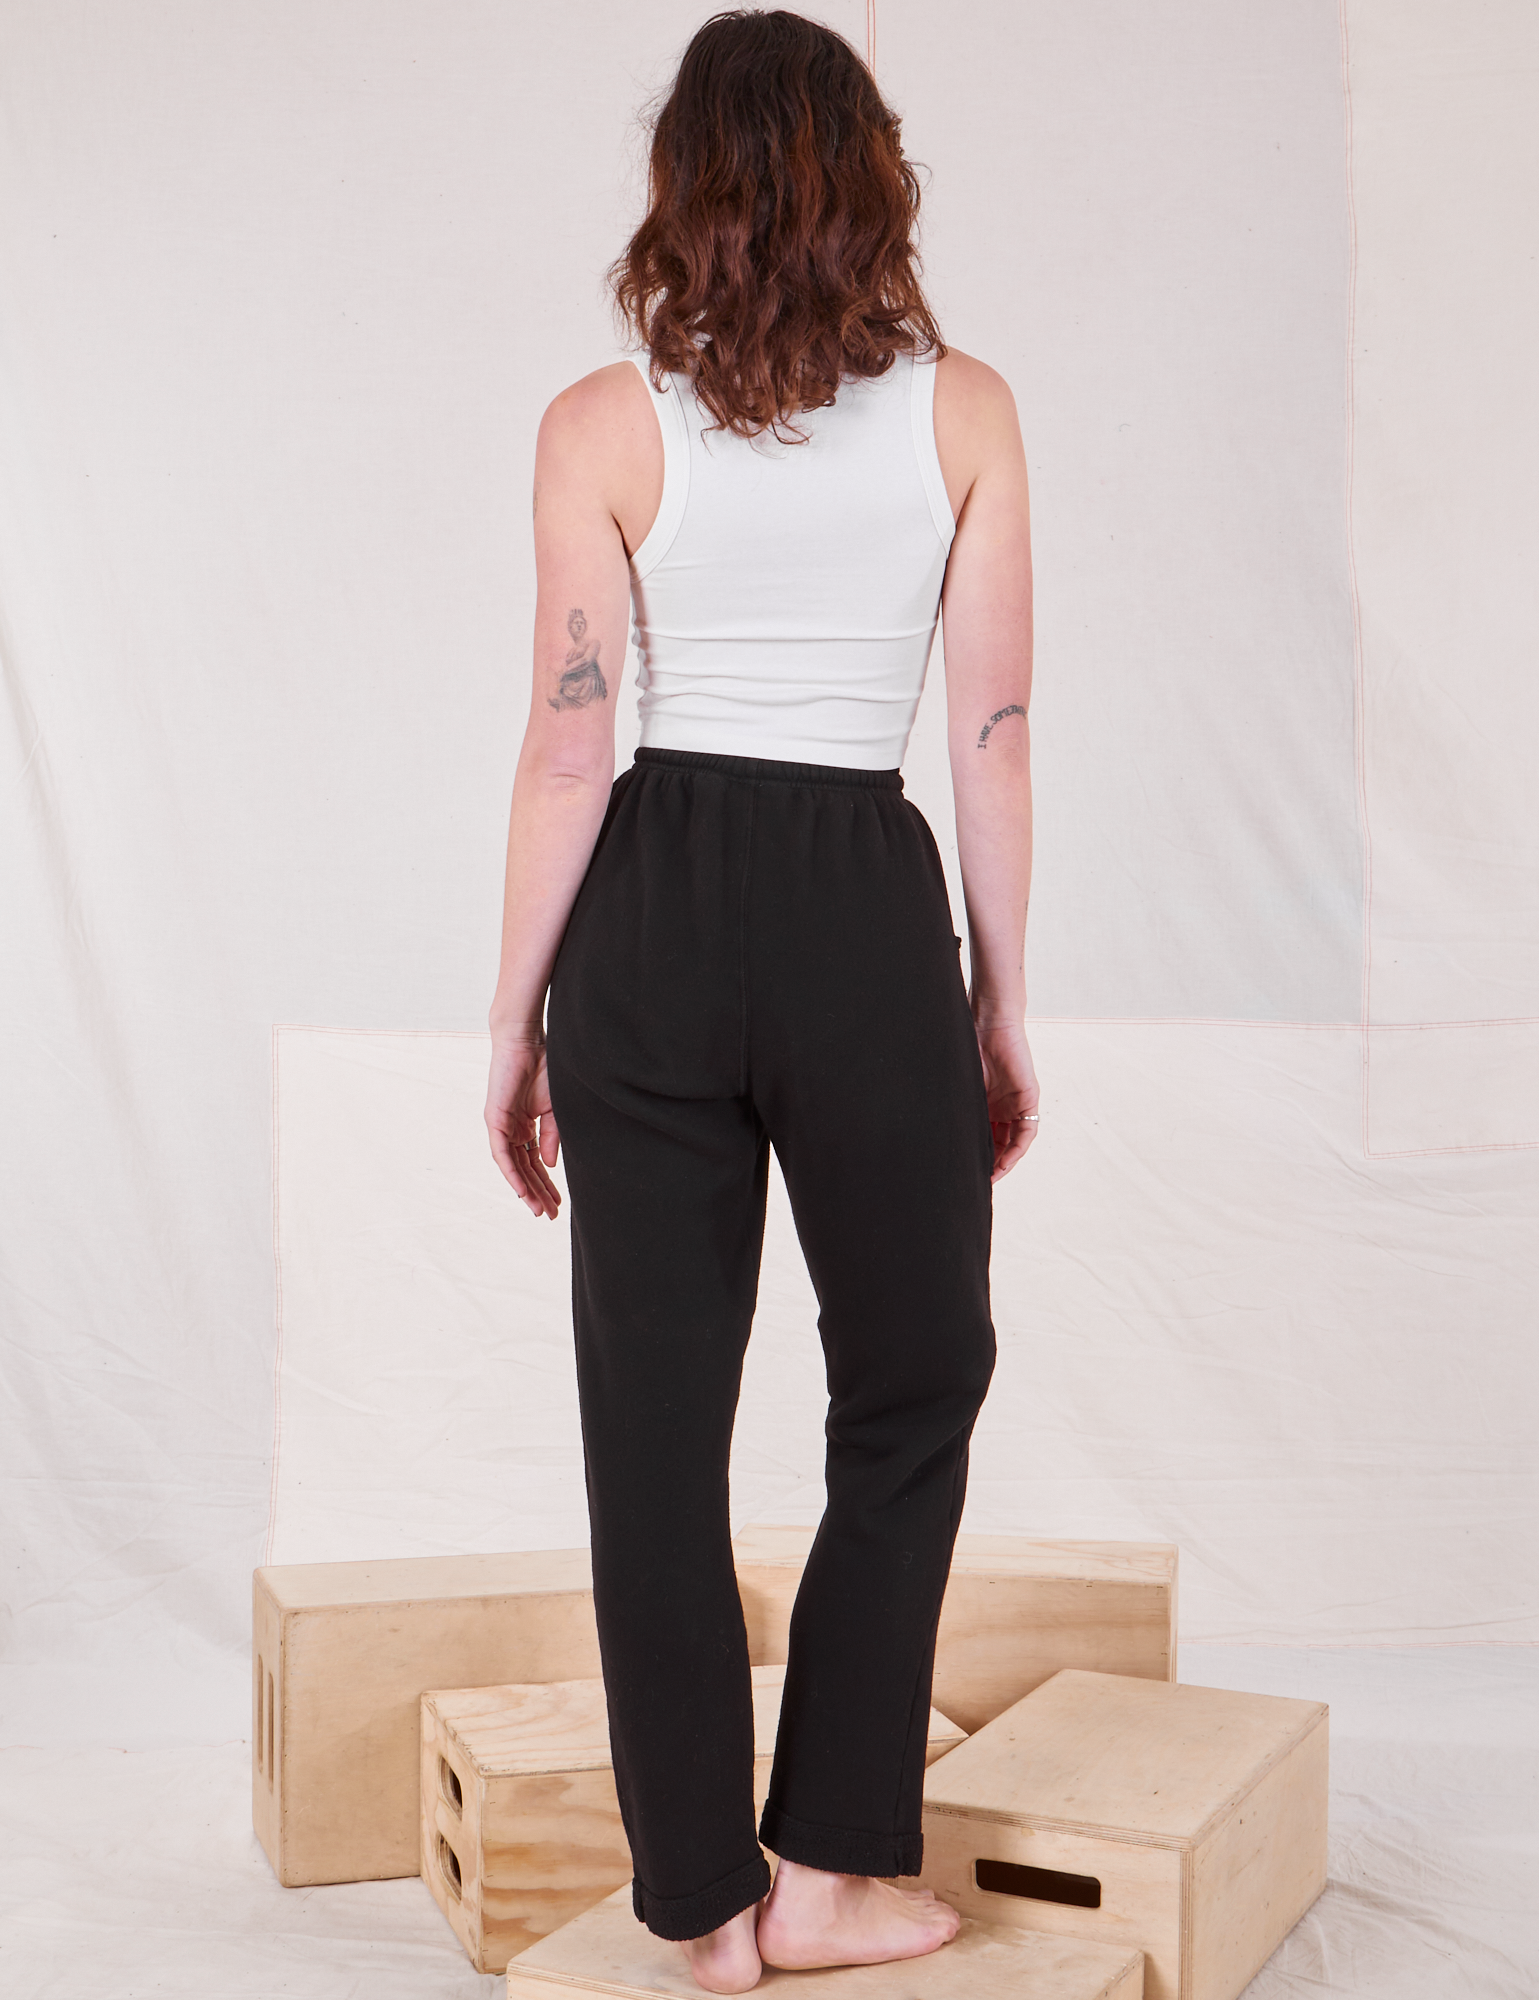 Back view of Rolled Cuff Sweat Pants in Basic Black and vintage off-white Cropped Tank on Alex